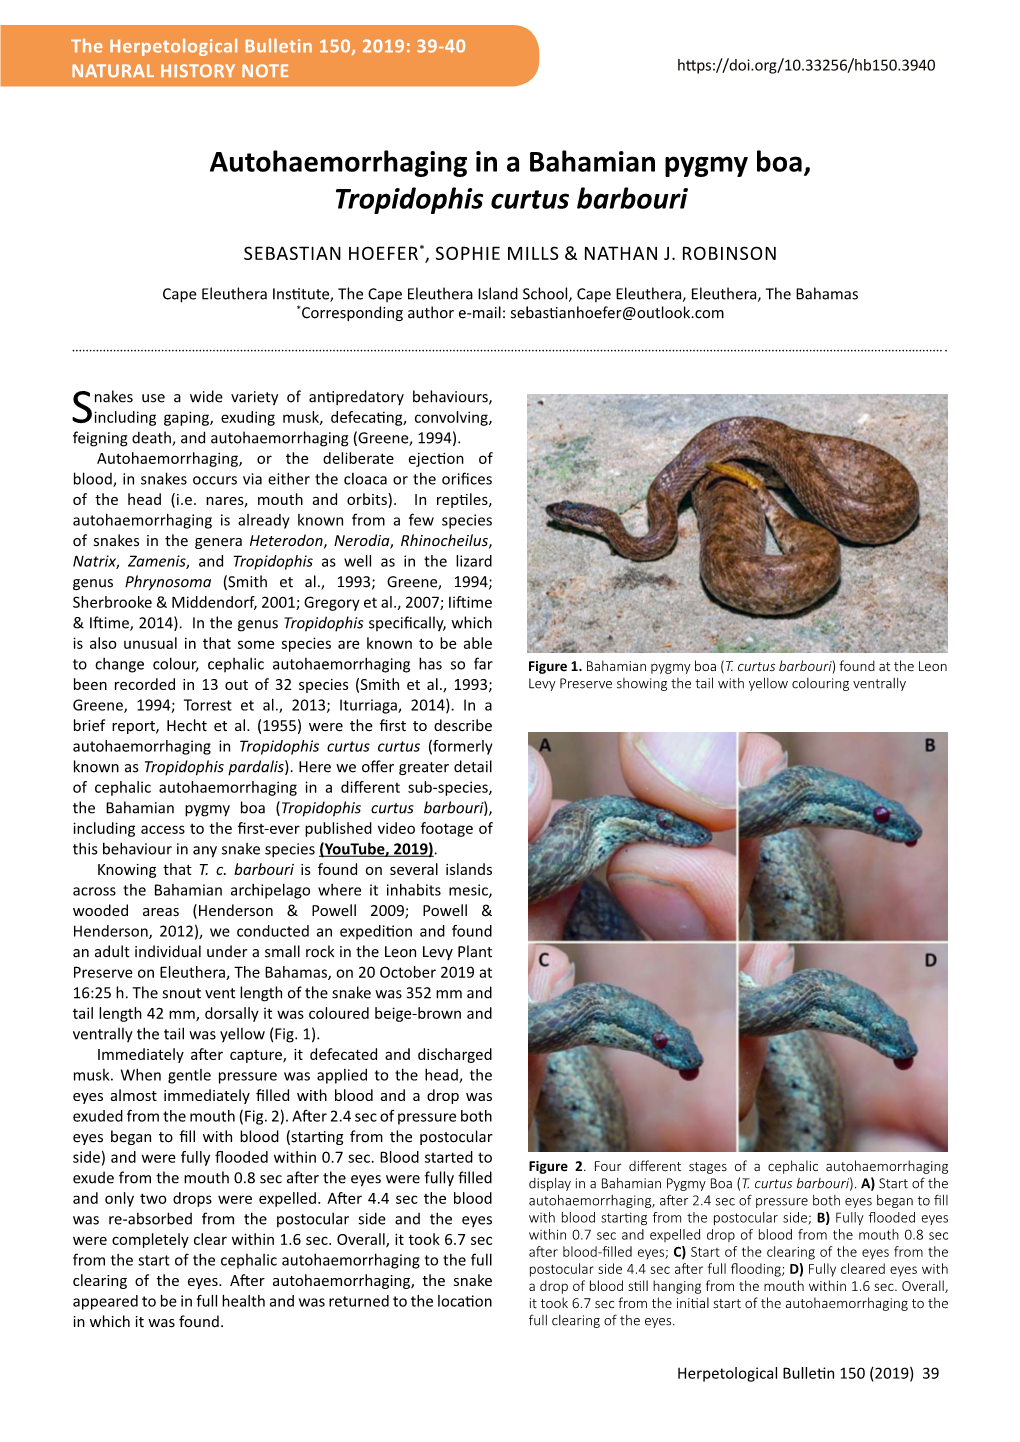 Autohaemorrhaging in a Bahamian Pygmy Boa, Tropidophis Curtus Barbouri